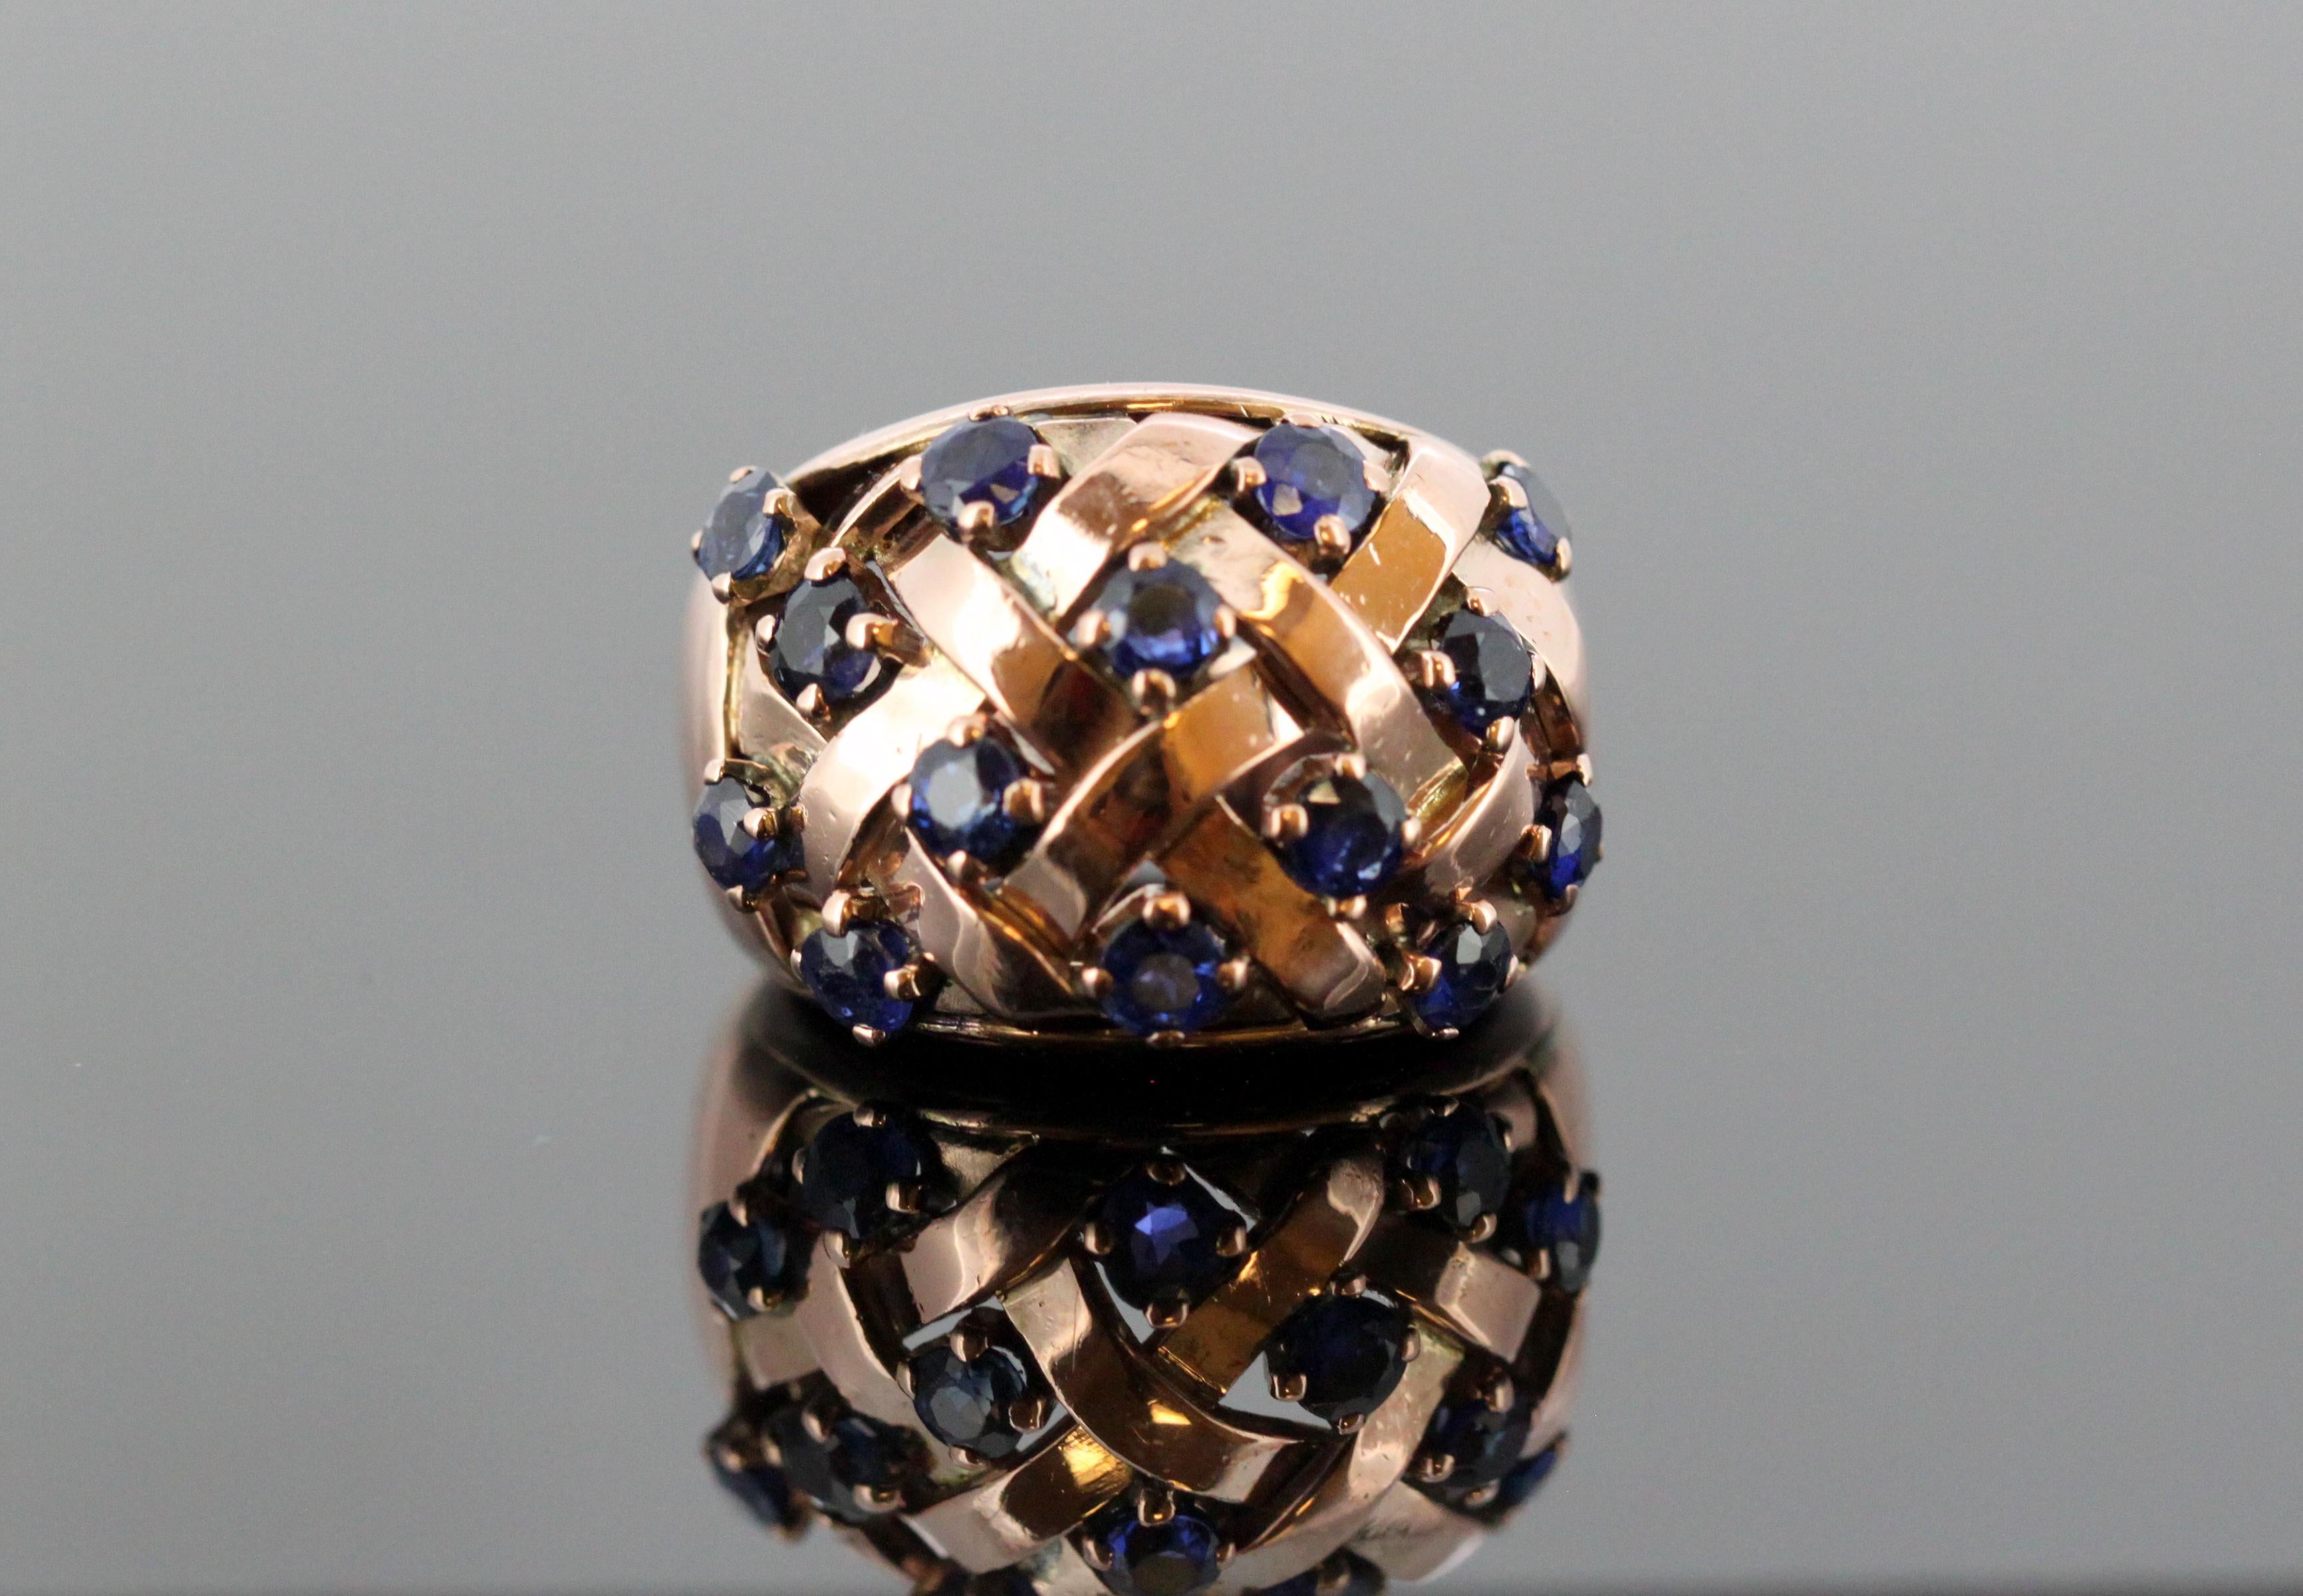 18k rose gold ladies ring with blue sapphires.
Designer: Boucheron
Made in London Circa 1970's
Fully hallmarked.

Dimension - 
Ring Size : 2.3 x 2.1 x 1.6 cm
Finger Size : (UK) = G (US) = 3 3/4  (EU) = 45 1/2
Weight : 9 grams

Blue Sapphire - 
Cut :